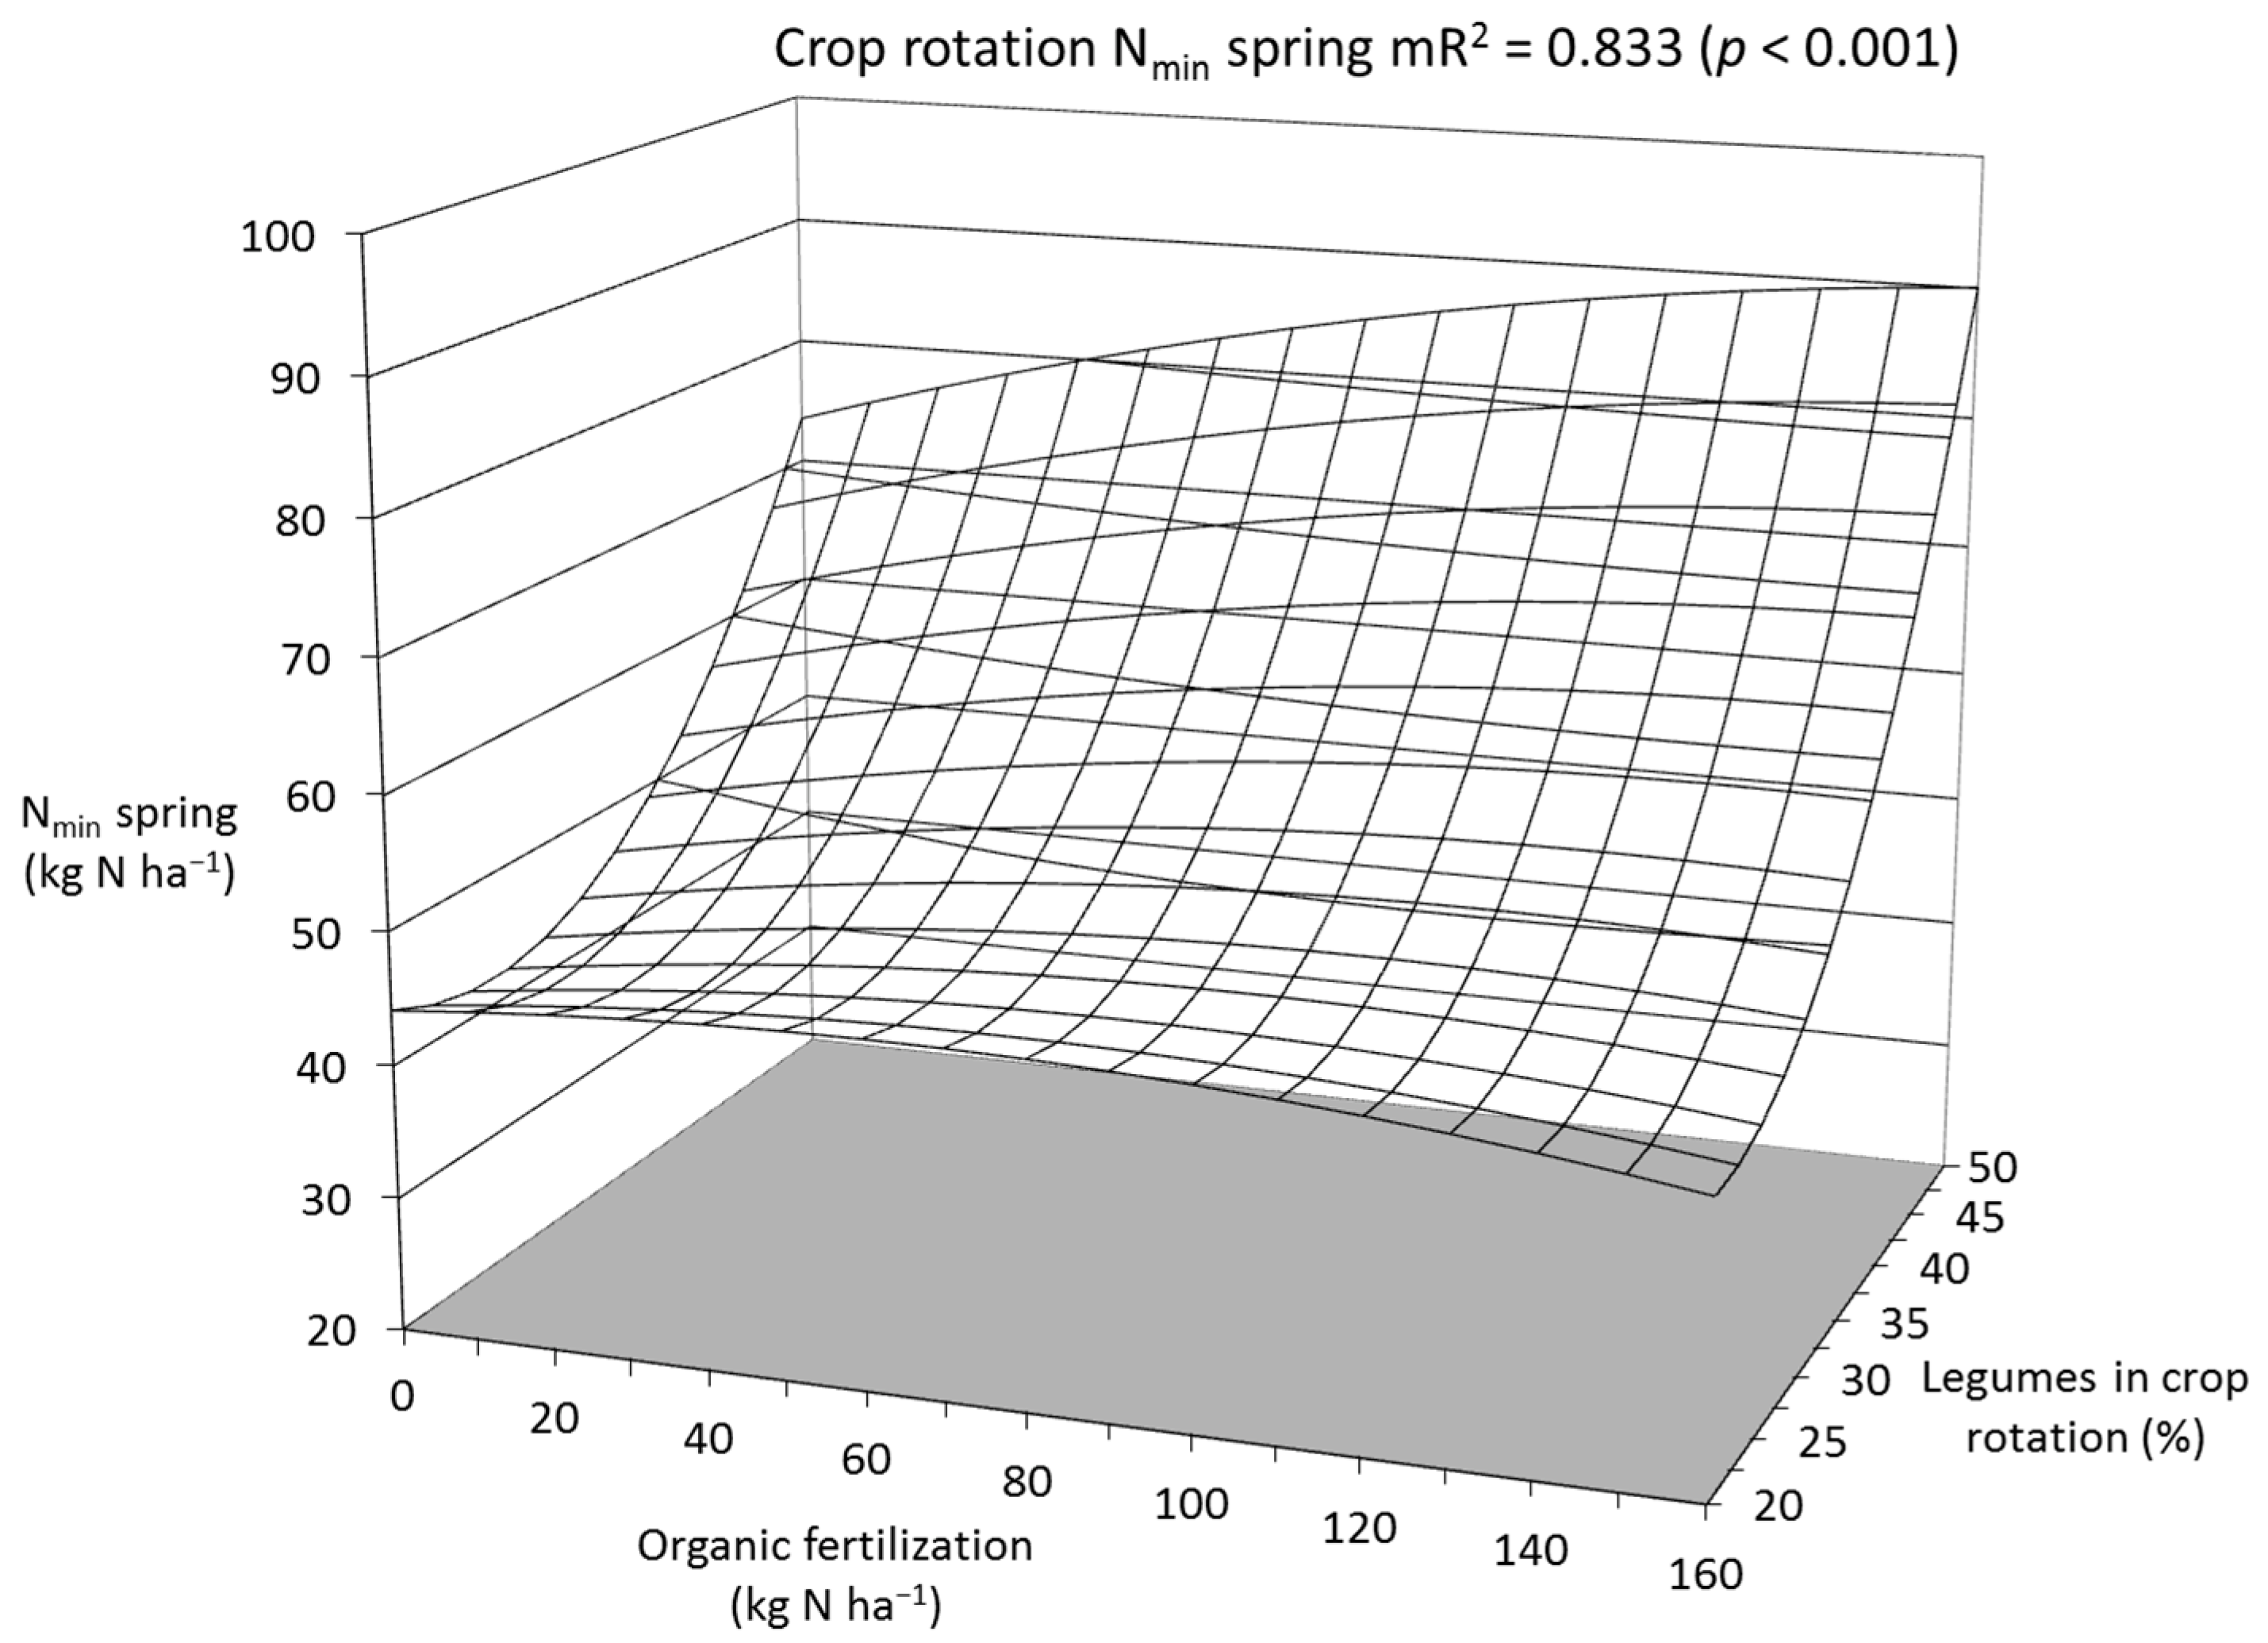 Agronomy | Free Full-Text | Comparative Analysis of Soil Fertility,  Productivity, and Sustainability of Organic Farming in Central  Europe&mdash;Part 2: Cultivation Systems with Different Intensities of  Fertilization and Legume N2 Fixation as